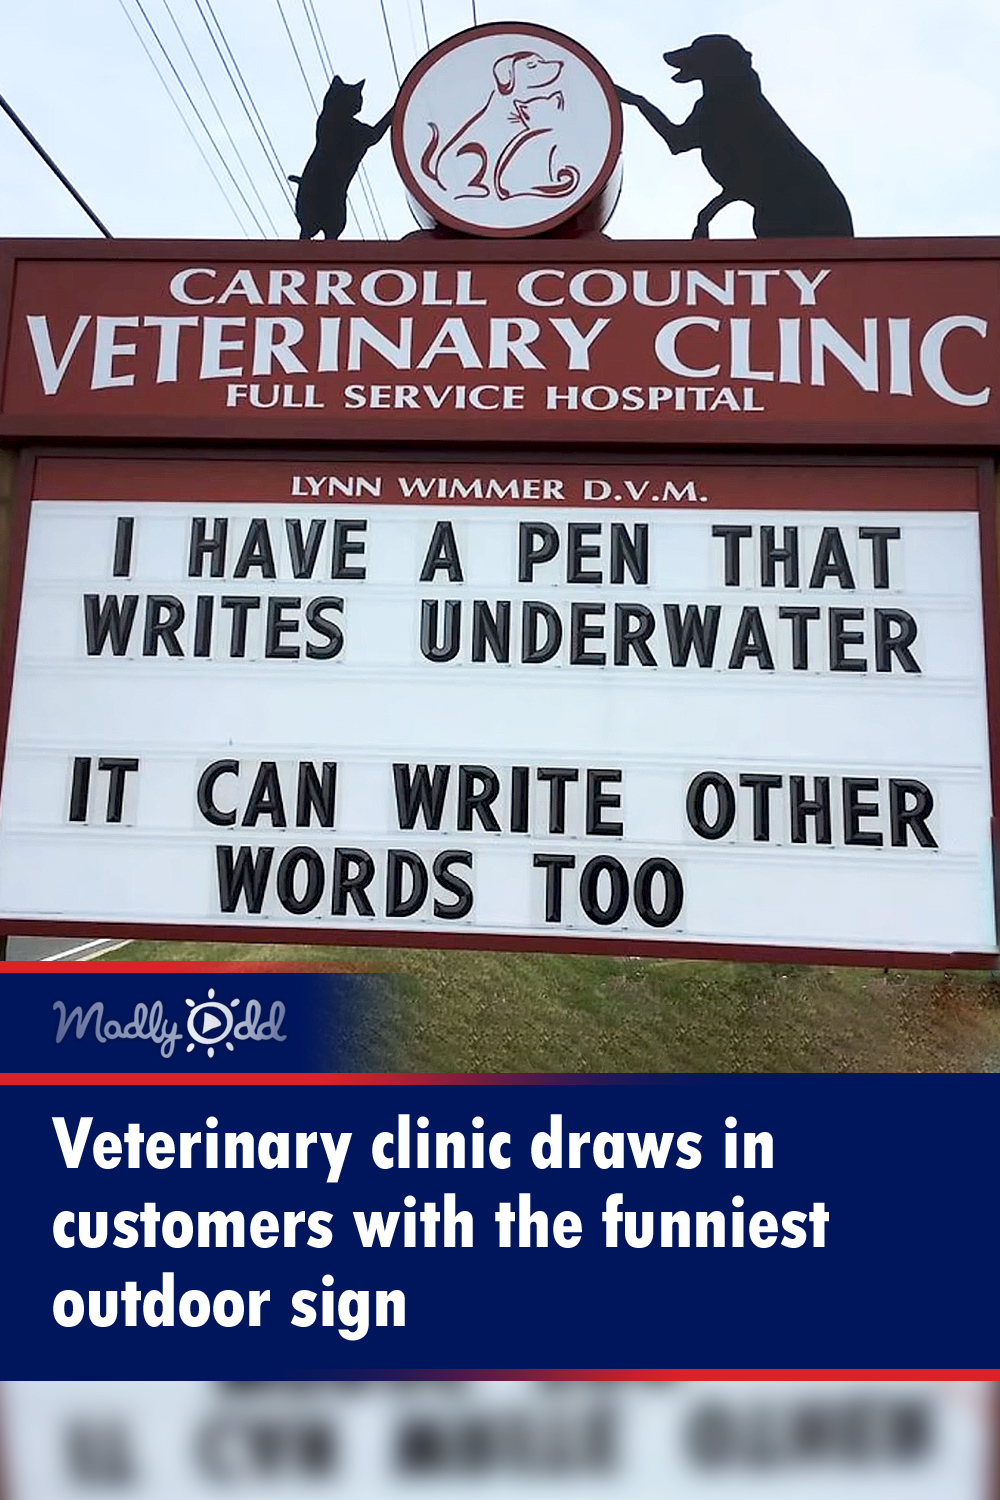 Veterinary clinic draws in customers with the funniest outdoor sign